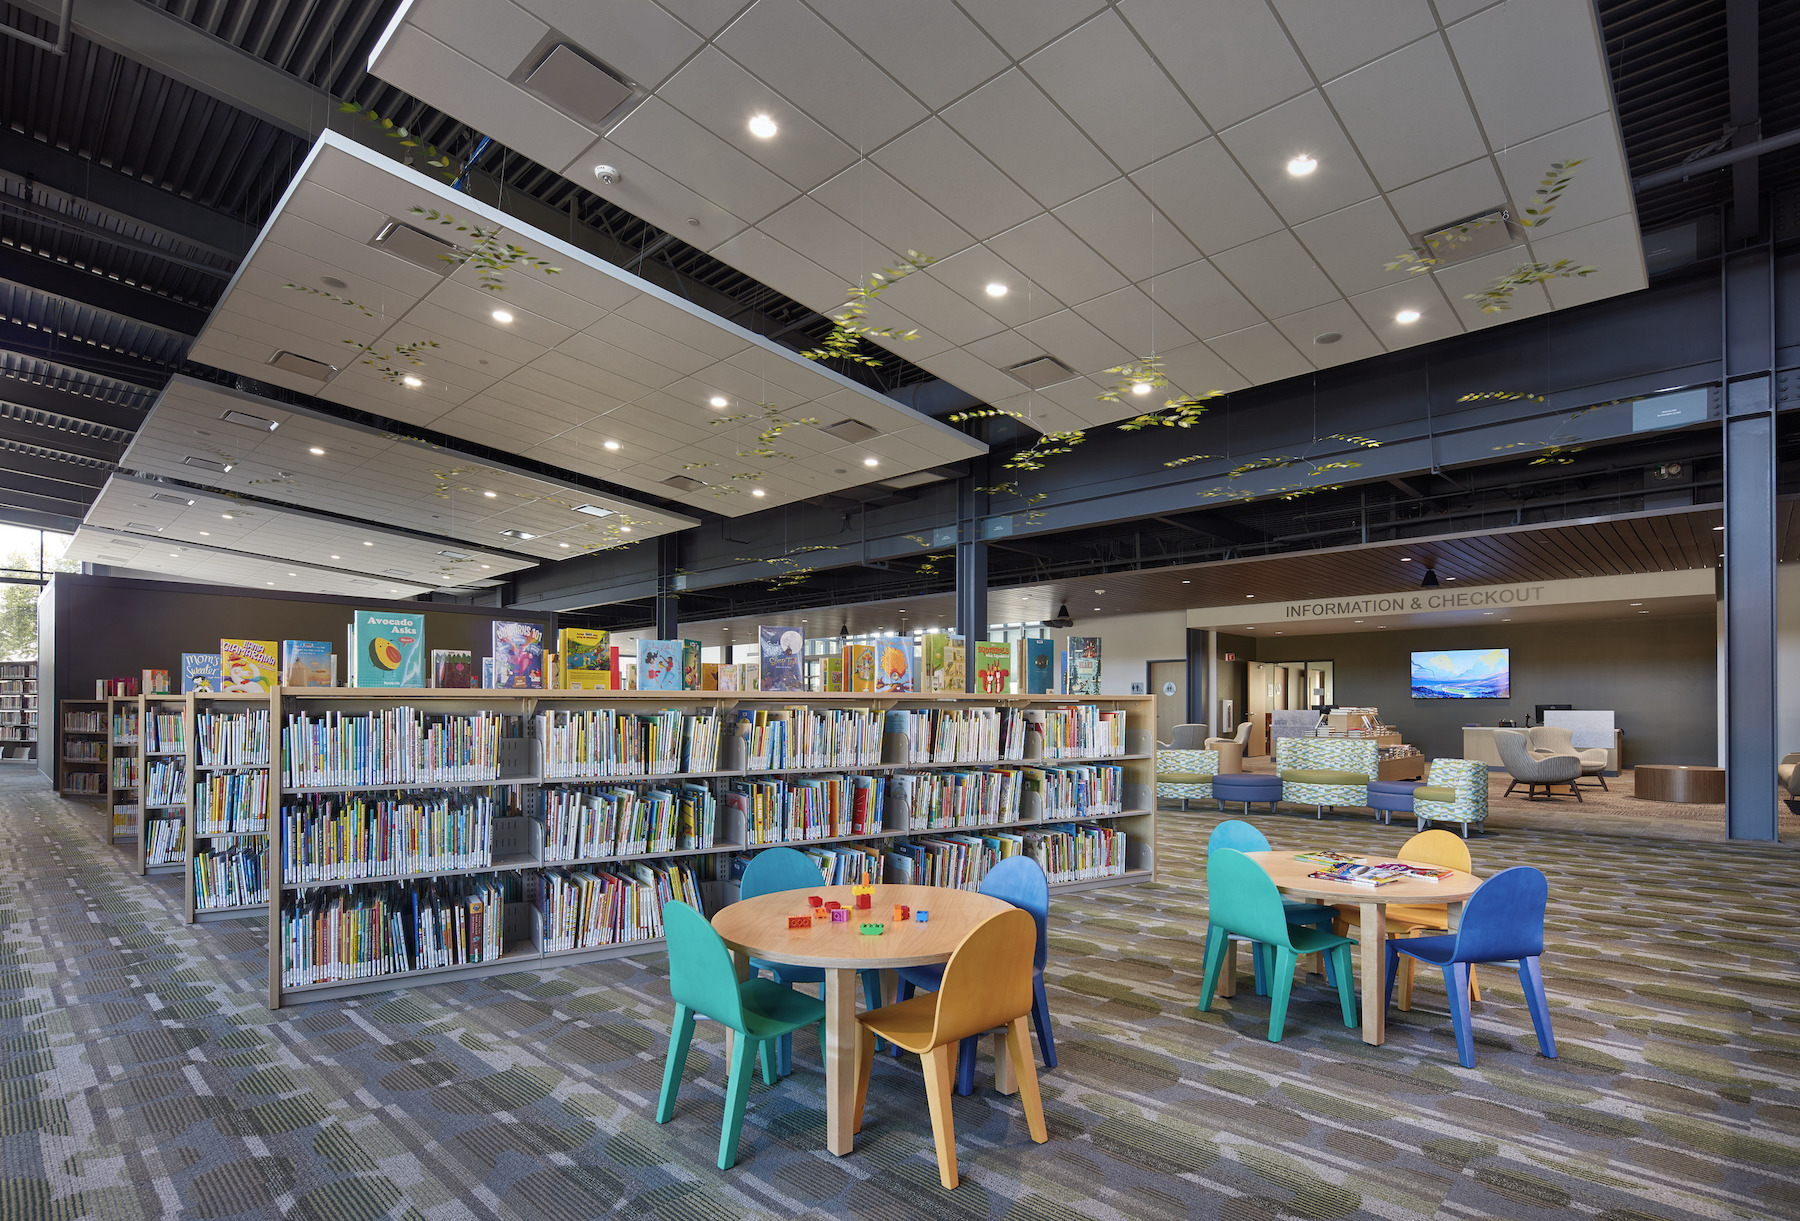 The new library in Menifee, Calif.